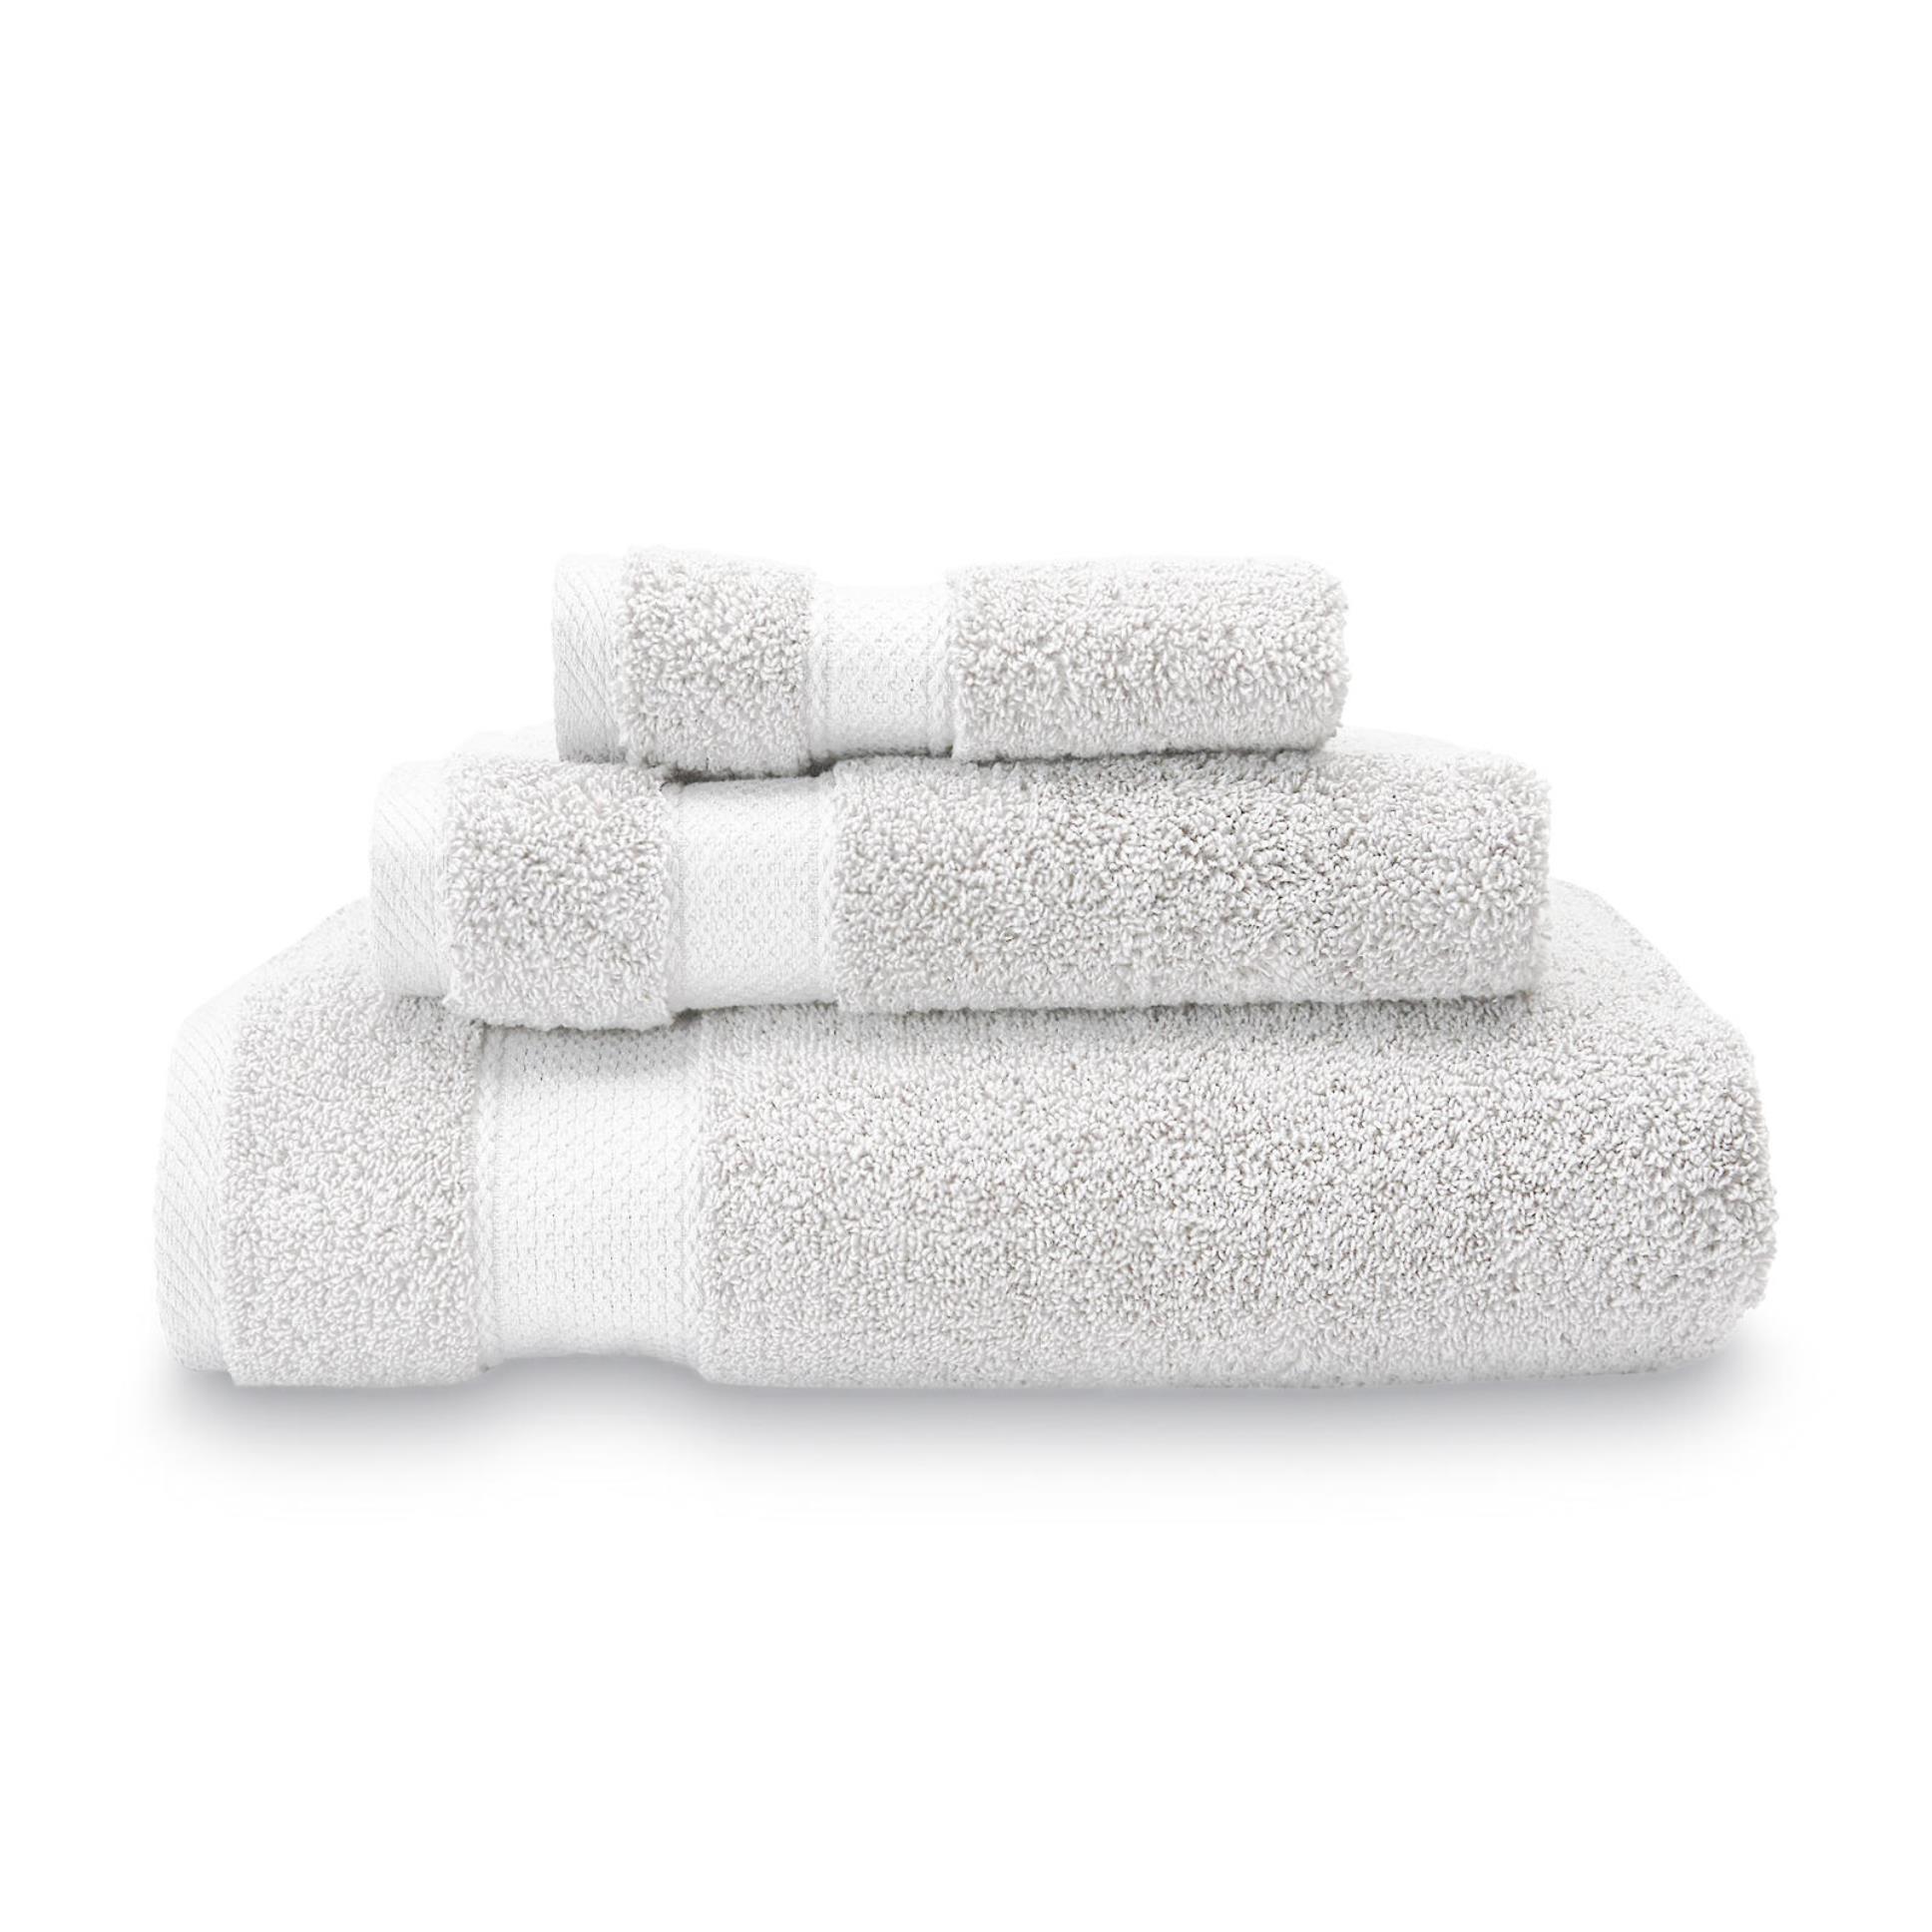 Cannon Egyptian Cotton Bath Towels  Hand Towels or Washcloths